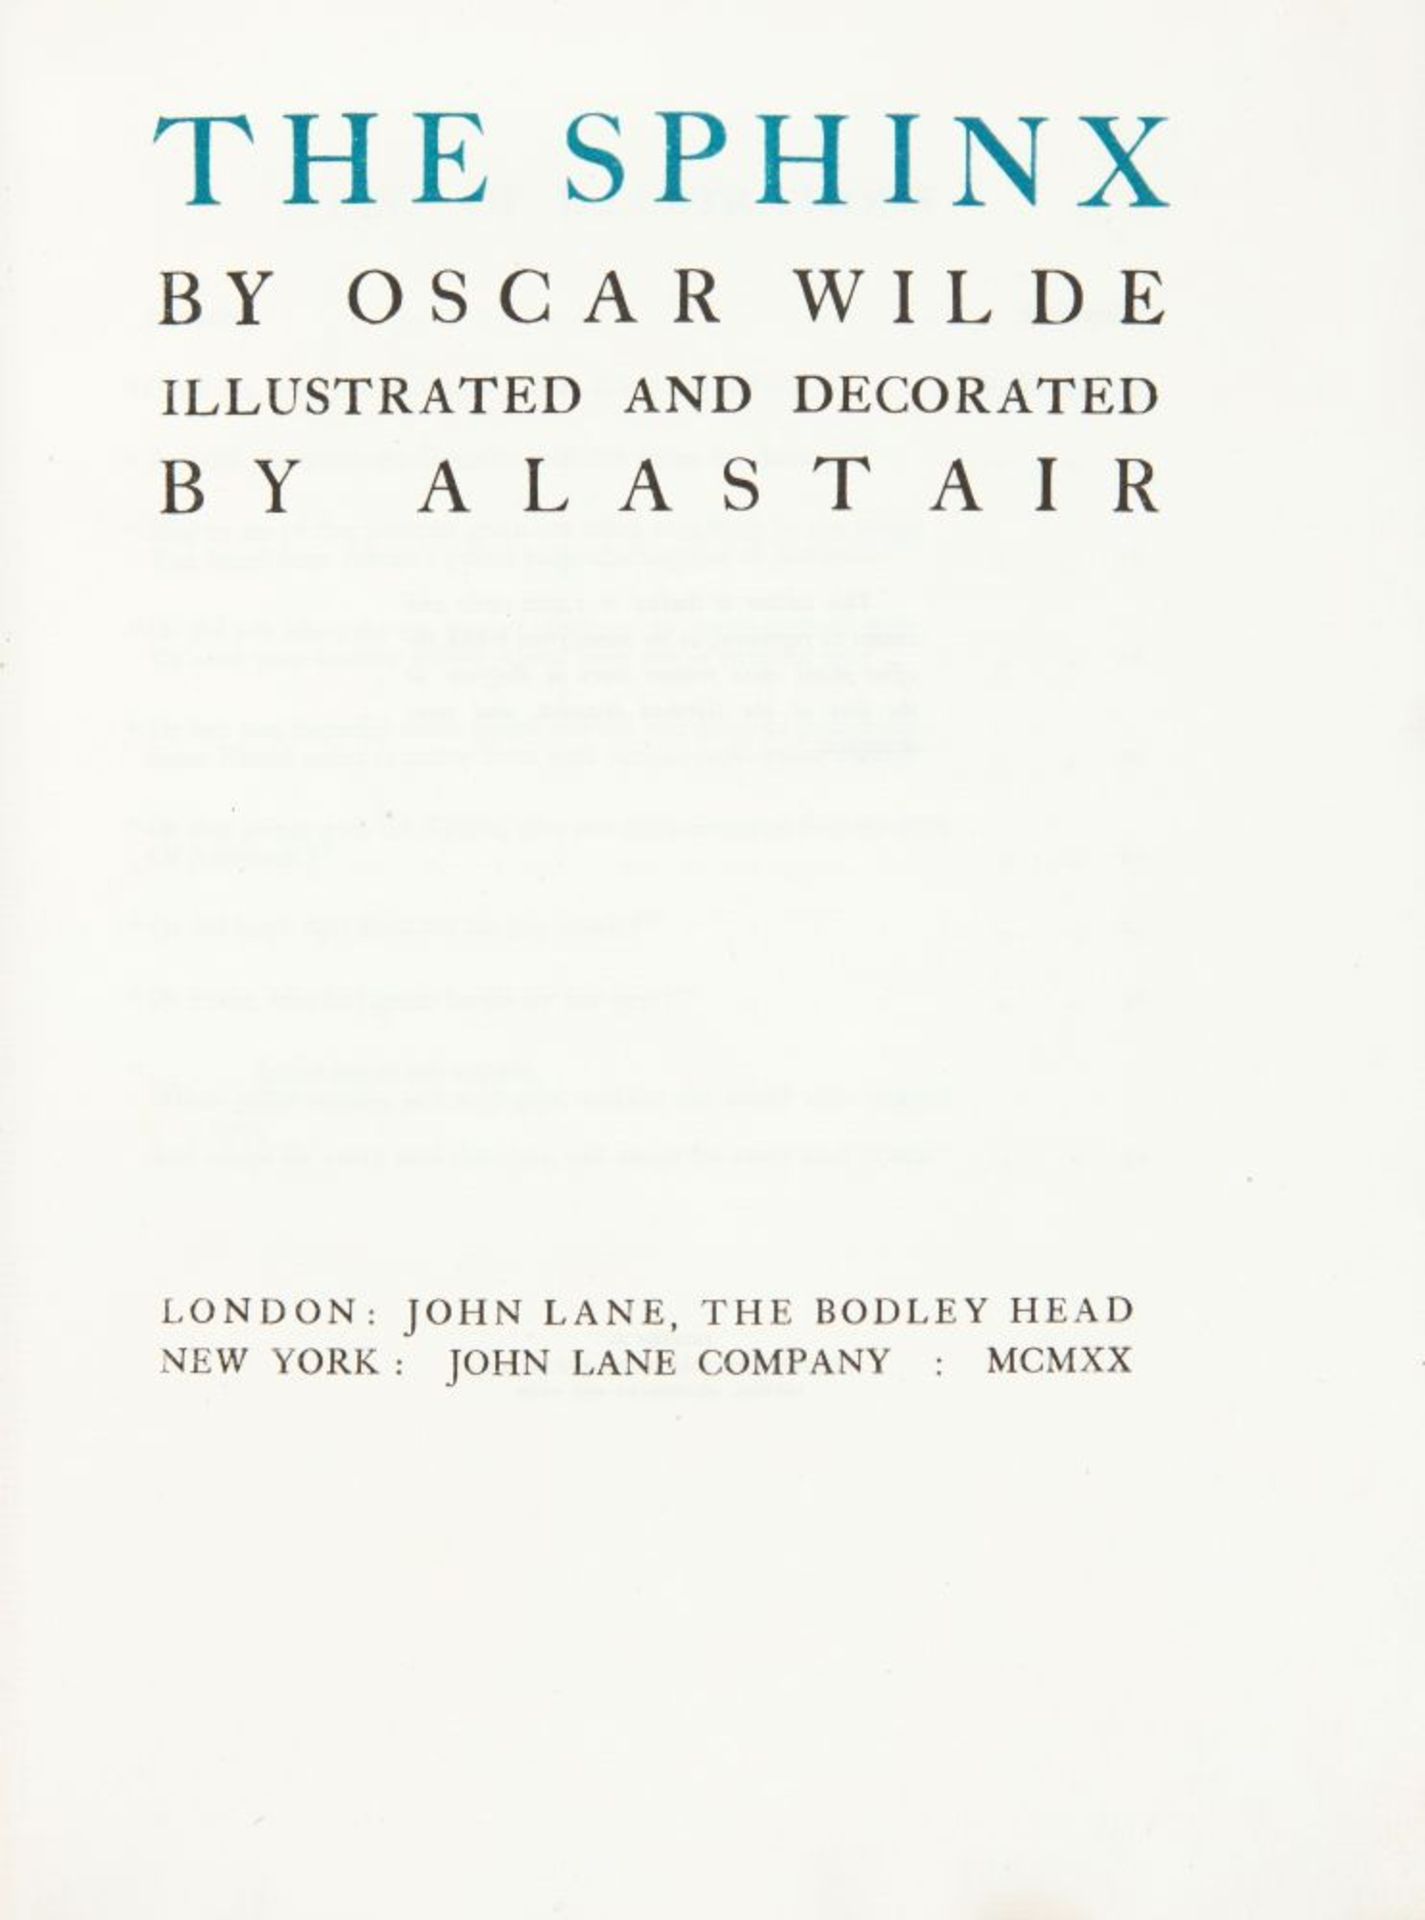 Alastair / O. Wilde, The Sphinx. London 1920. - 1000 Ex. - Image 2 of 3